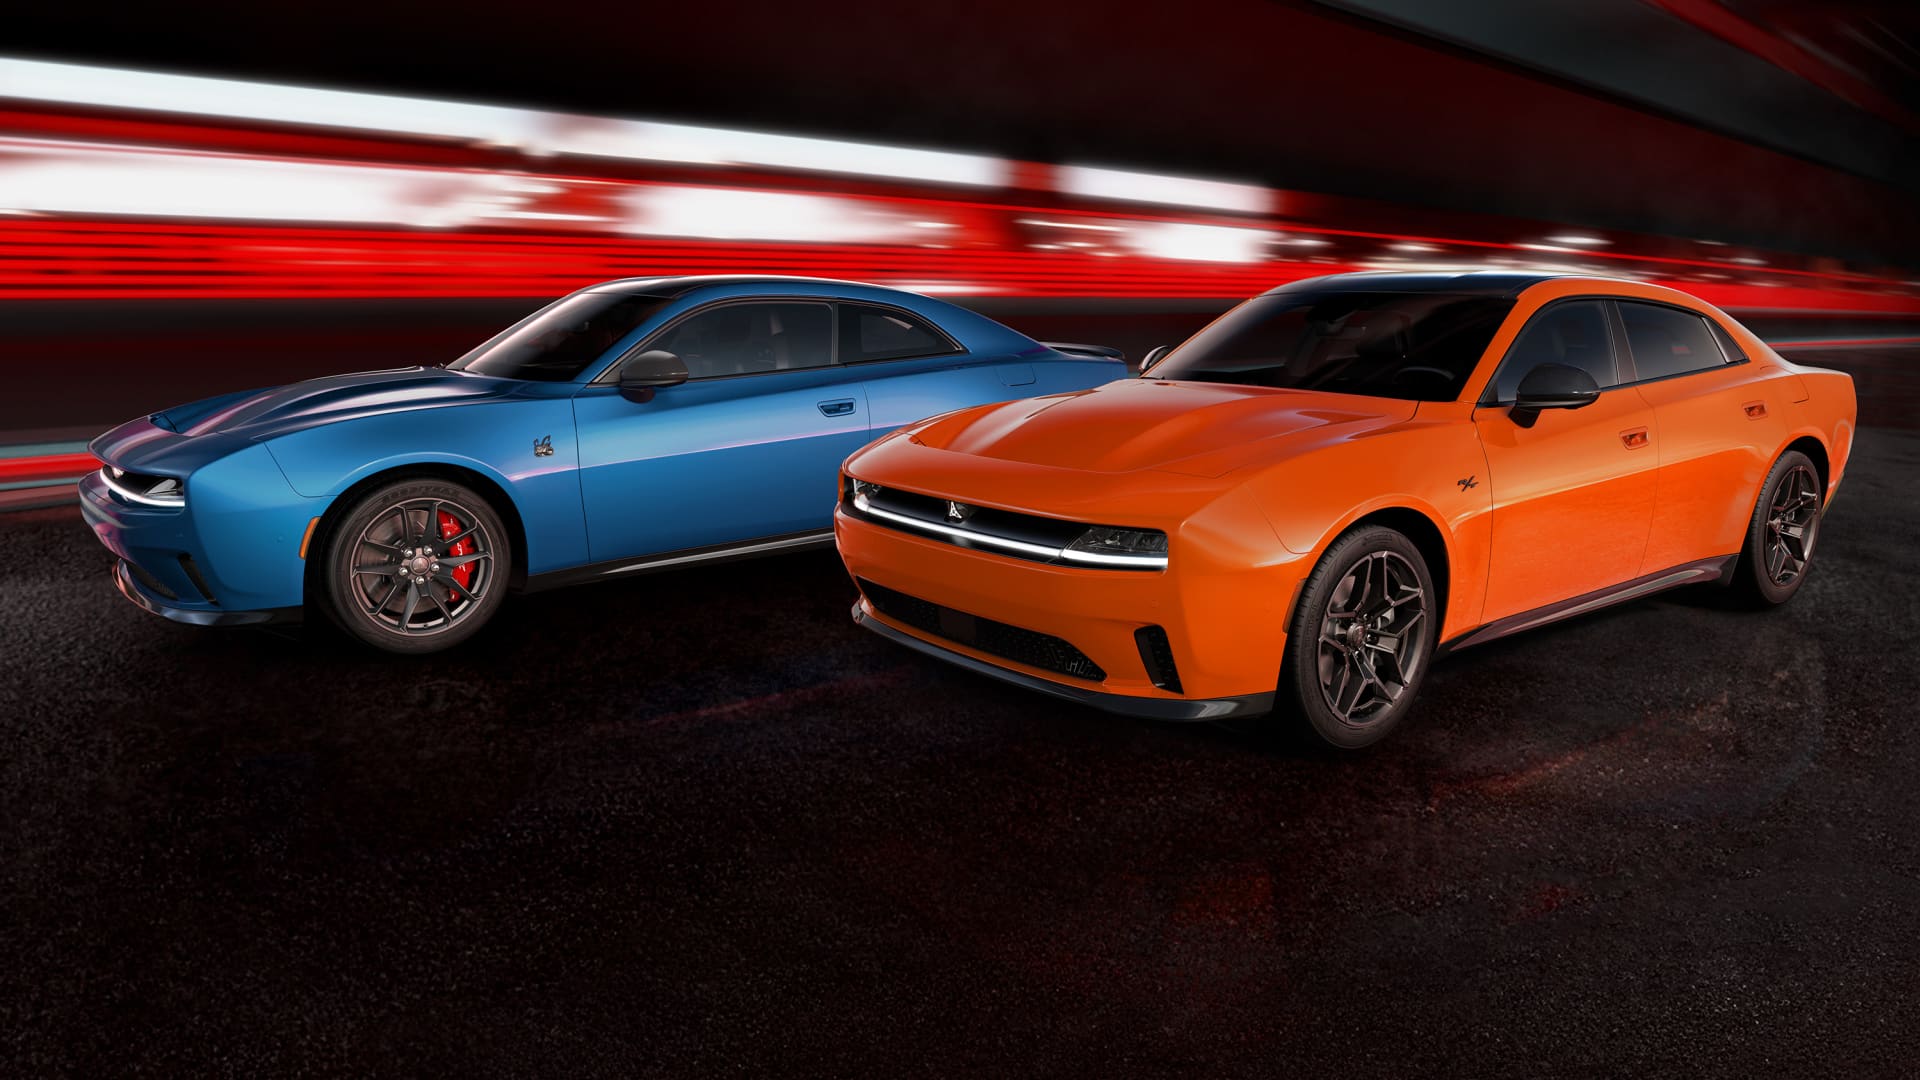 All models of the next-generation Charger will eventually come in two- and four-door variants to replace the four-door Dodge Charger and two-door Challenger.